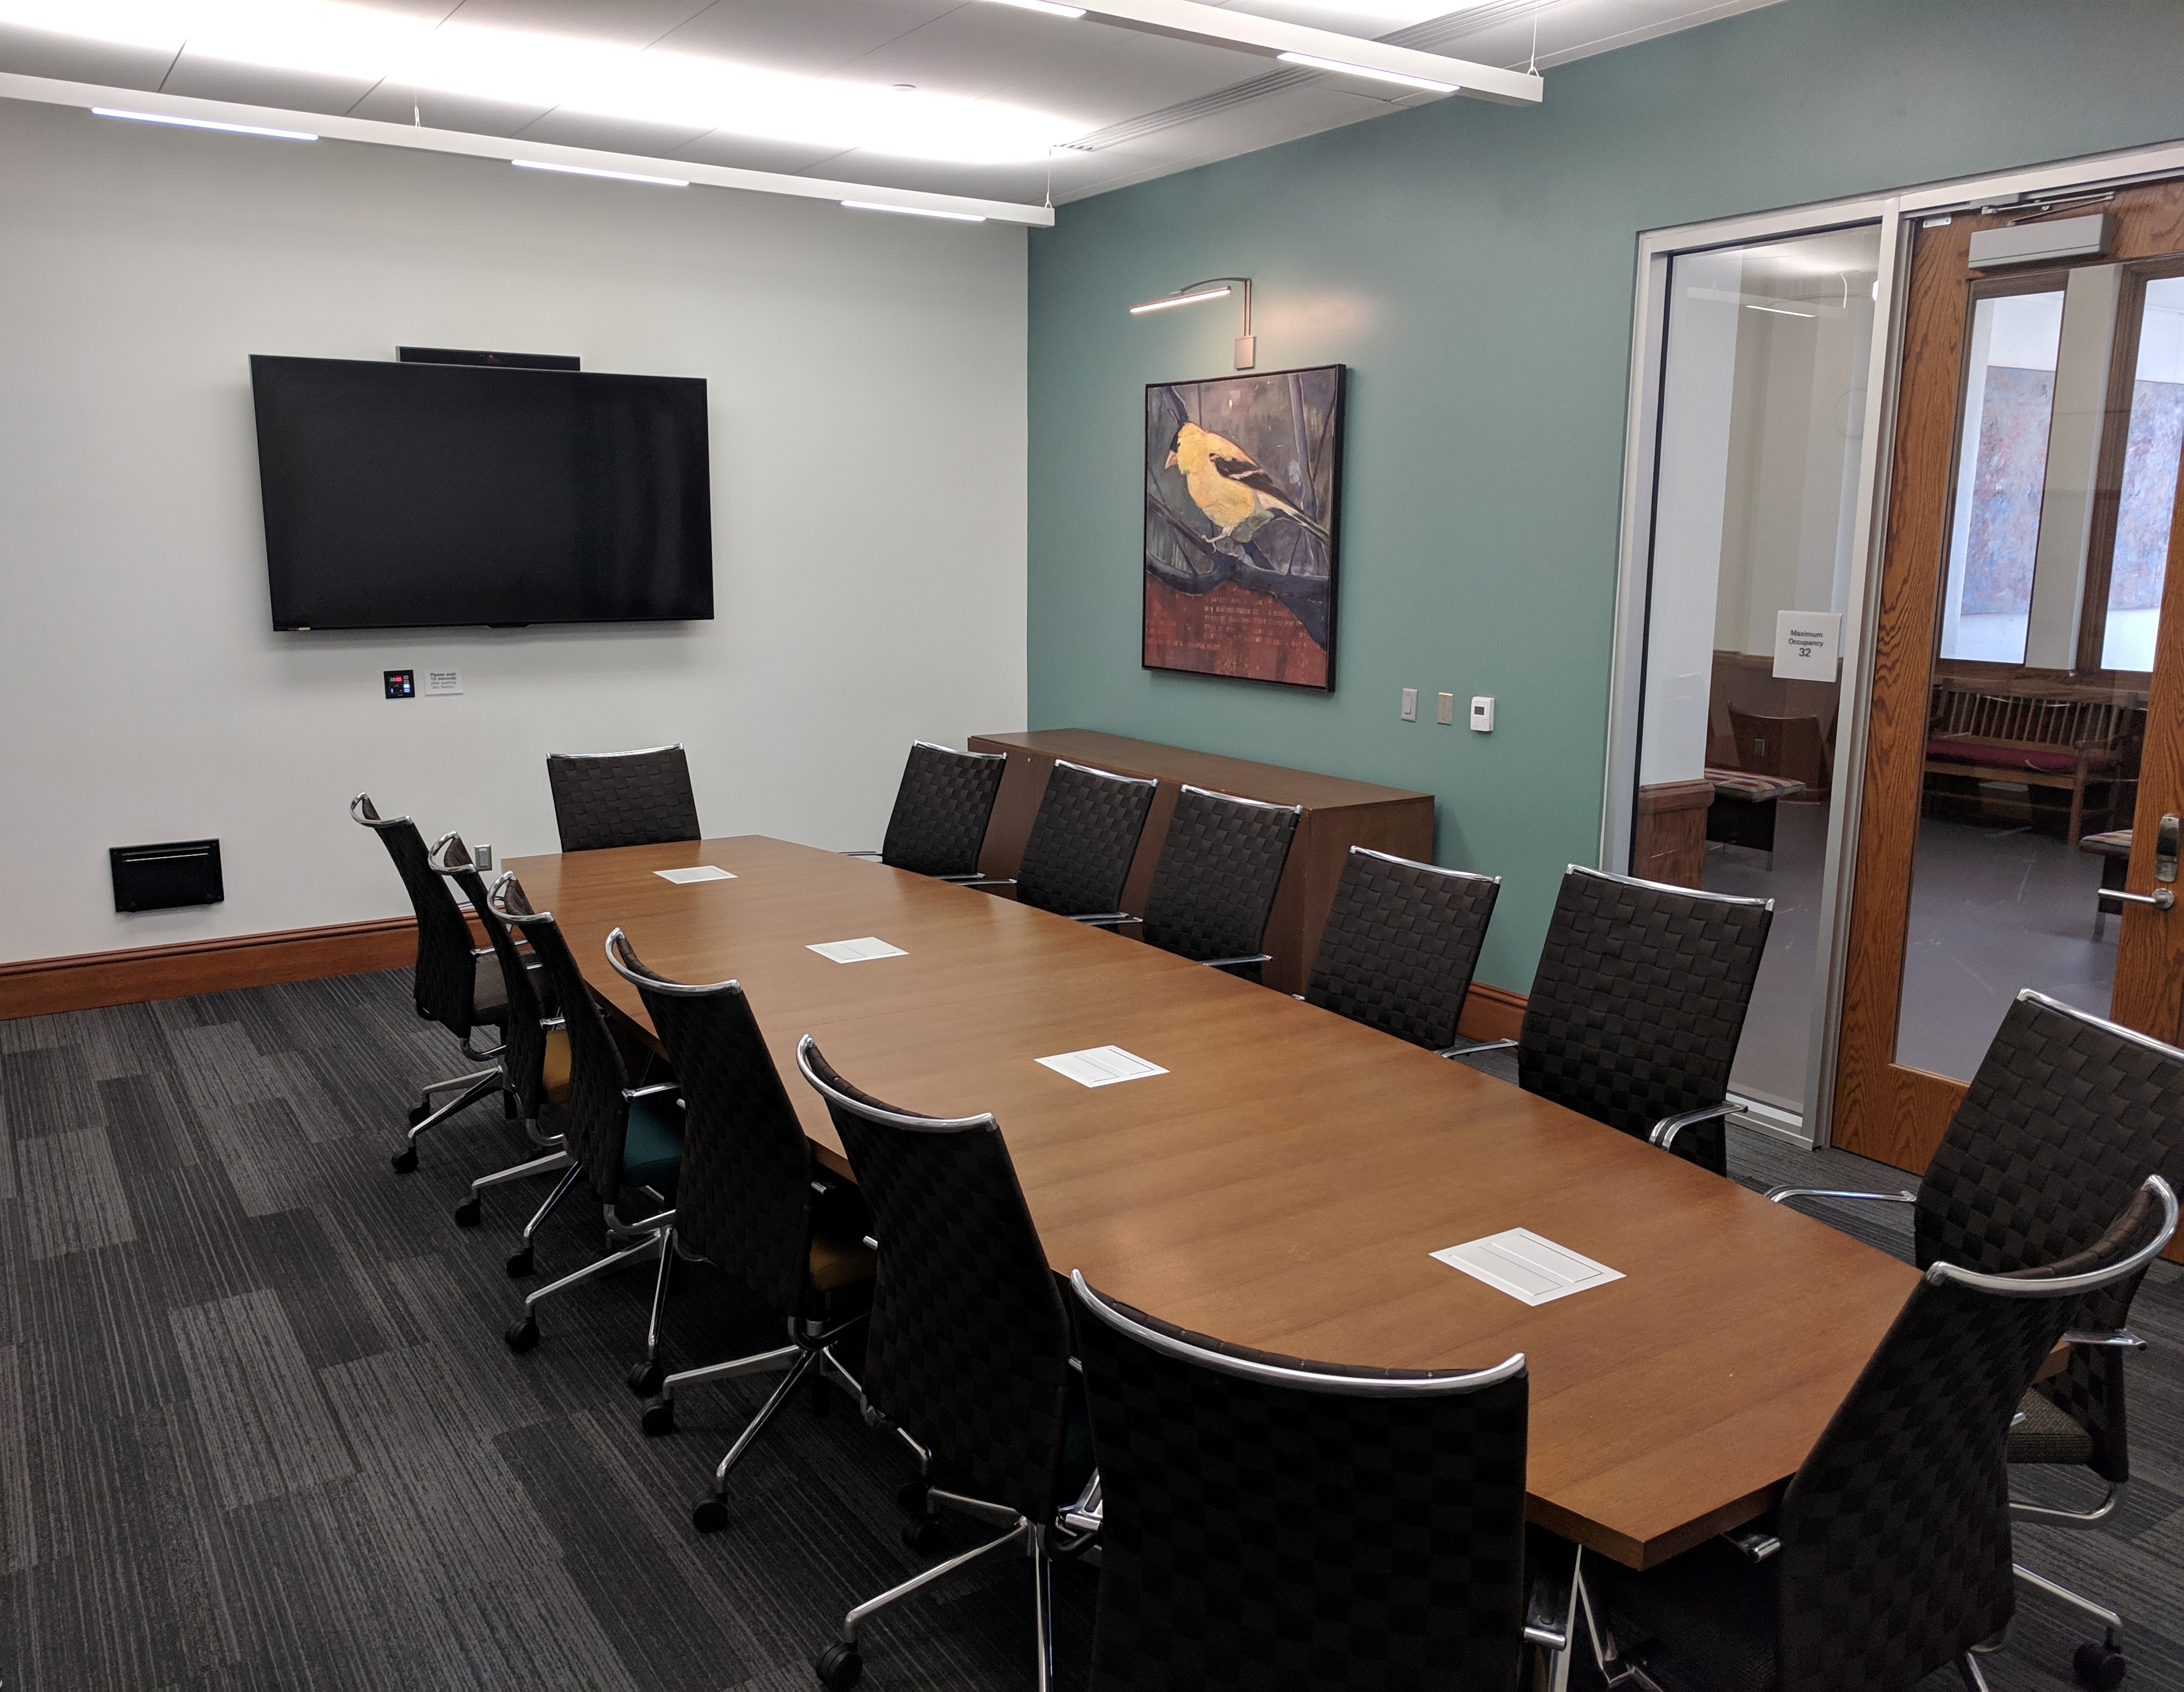 Dale H. Ross Boardroom with boardroom style seating and mounted tv screen